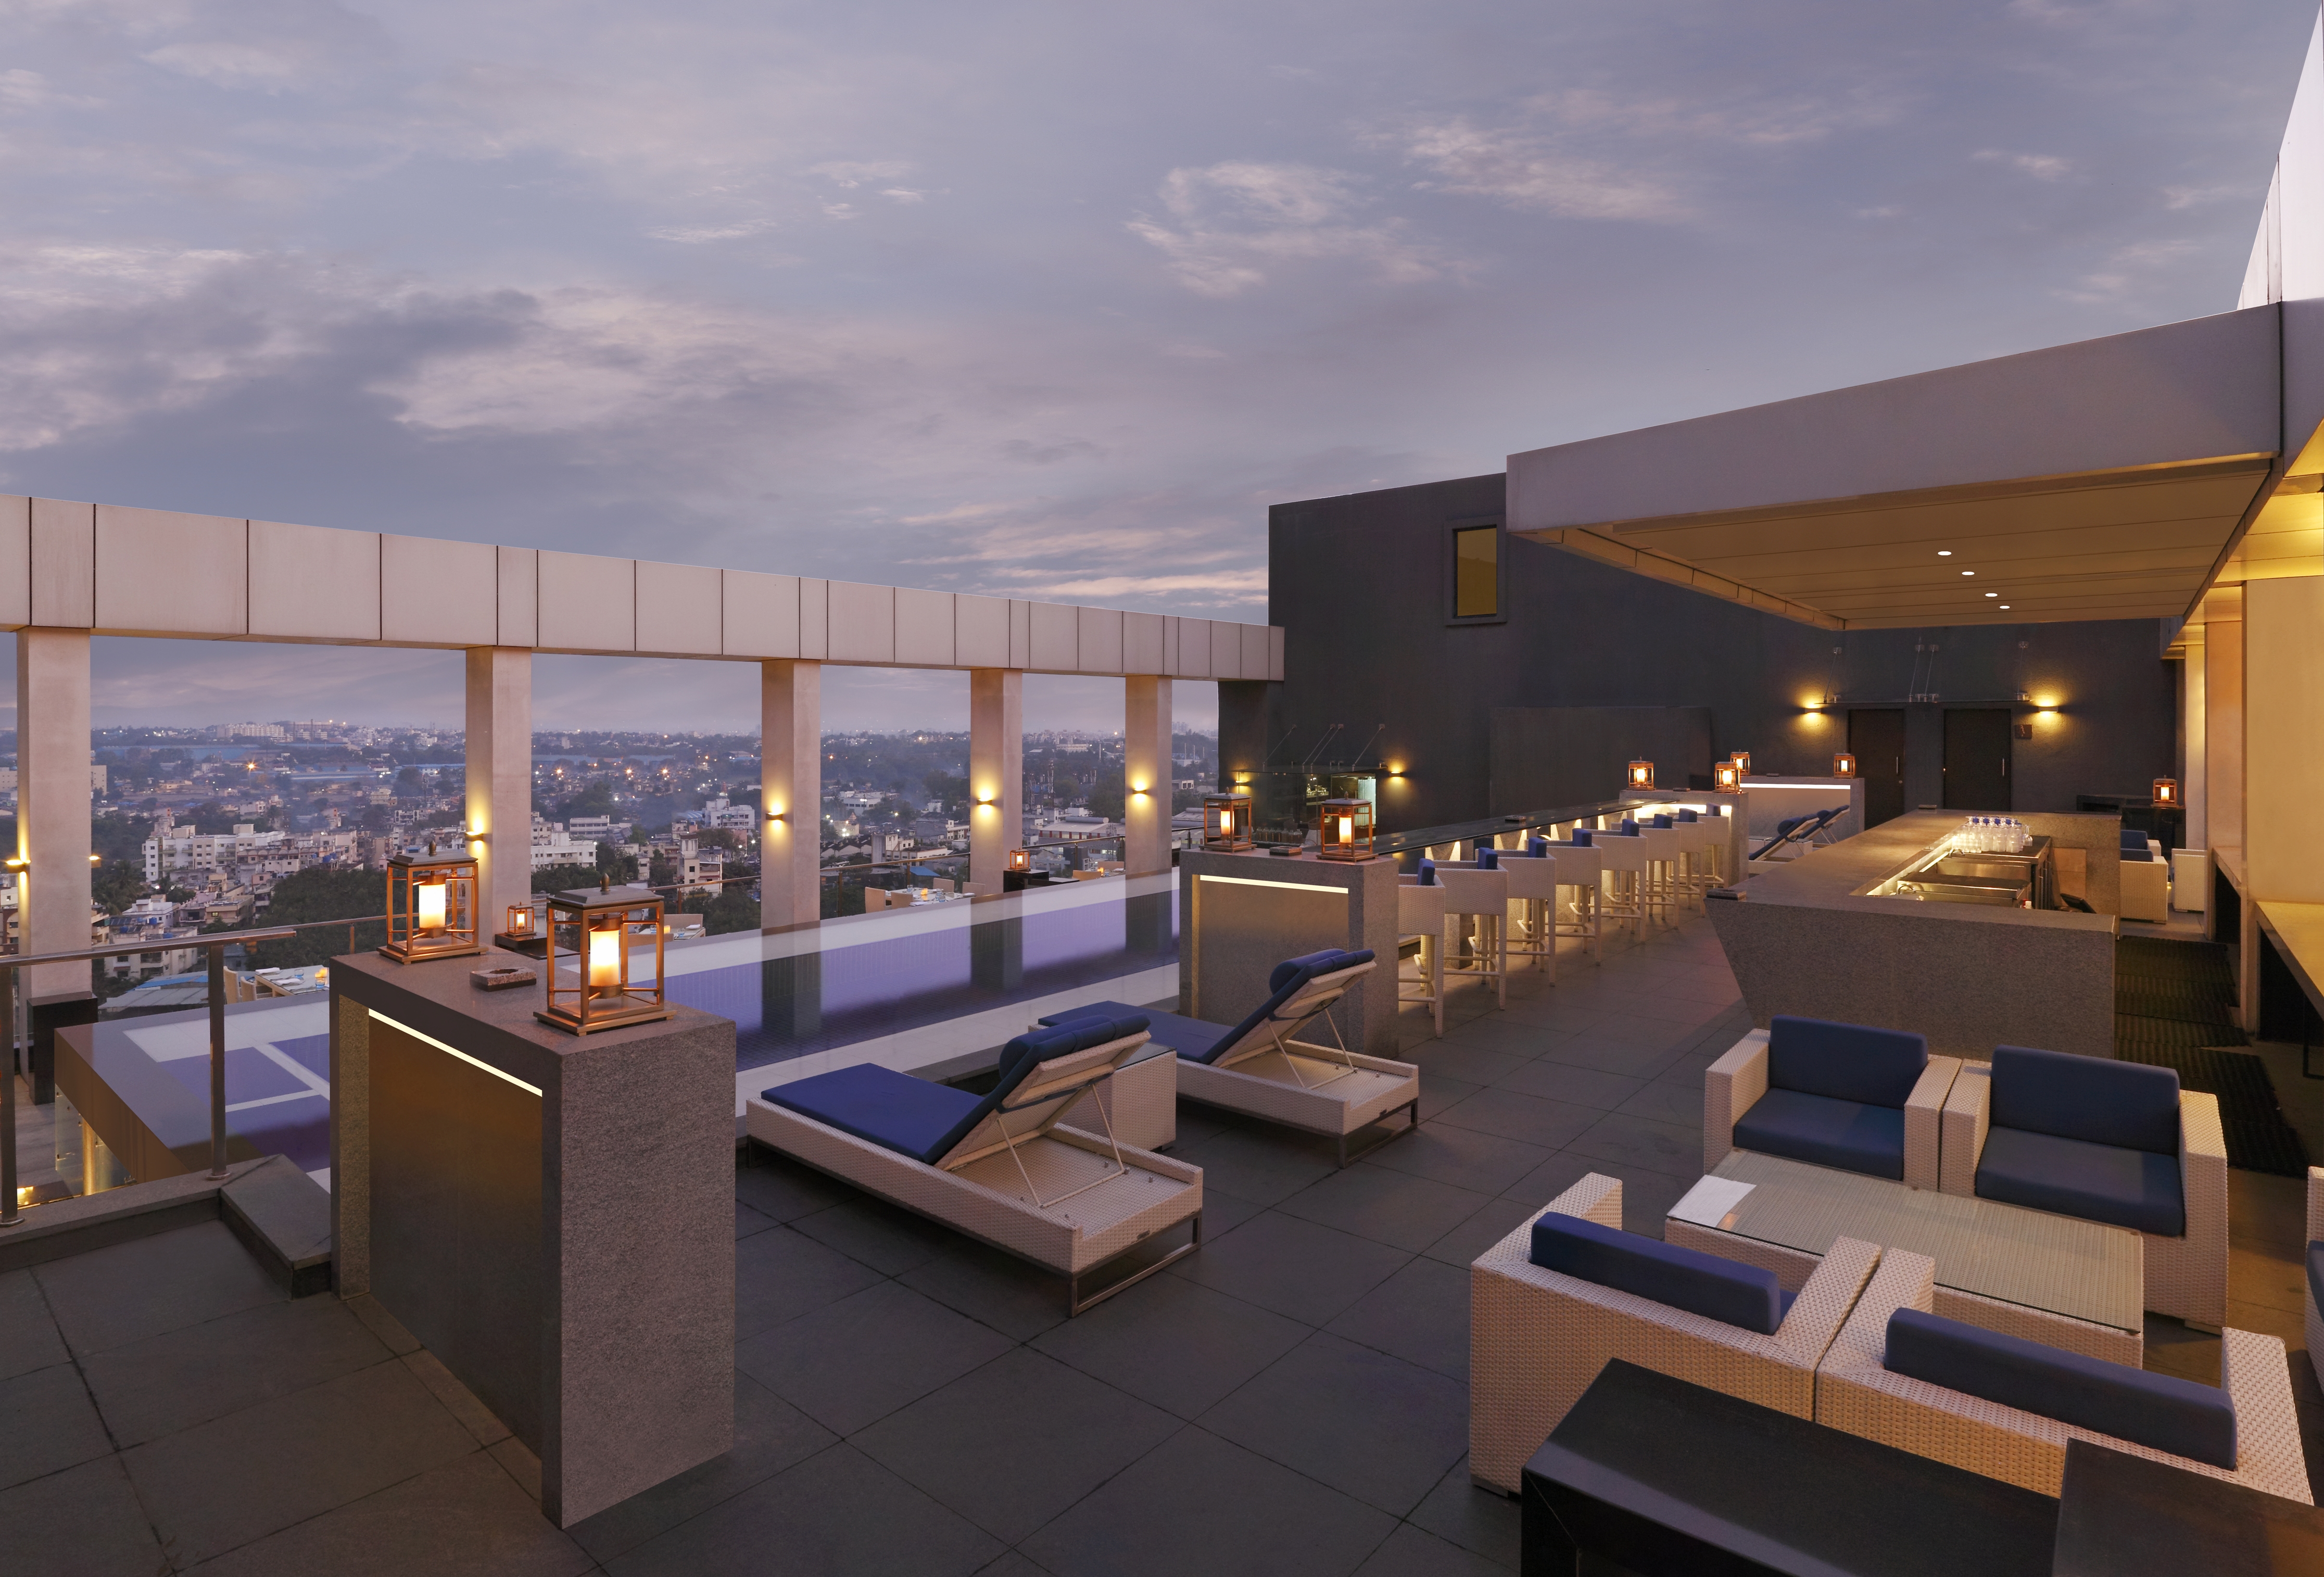 Dusk View of Loungers, Candles, and Soft Seating on Rooftop Lounge at Level 12 Restaurant